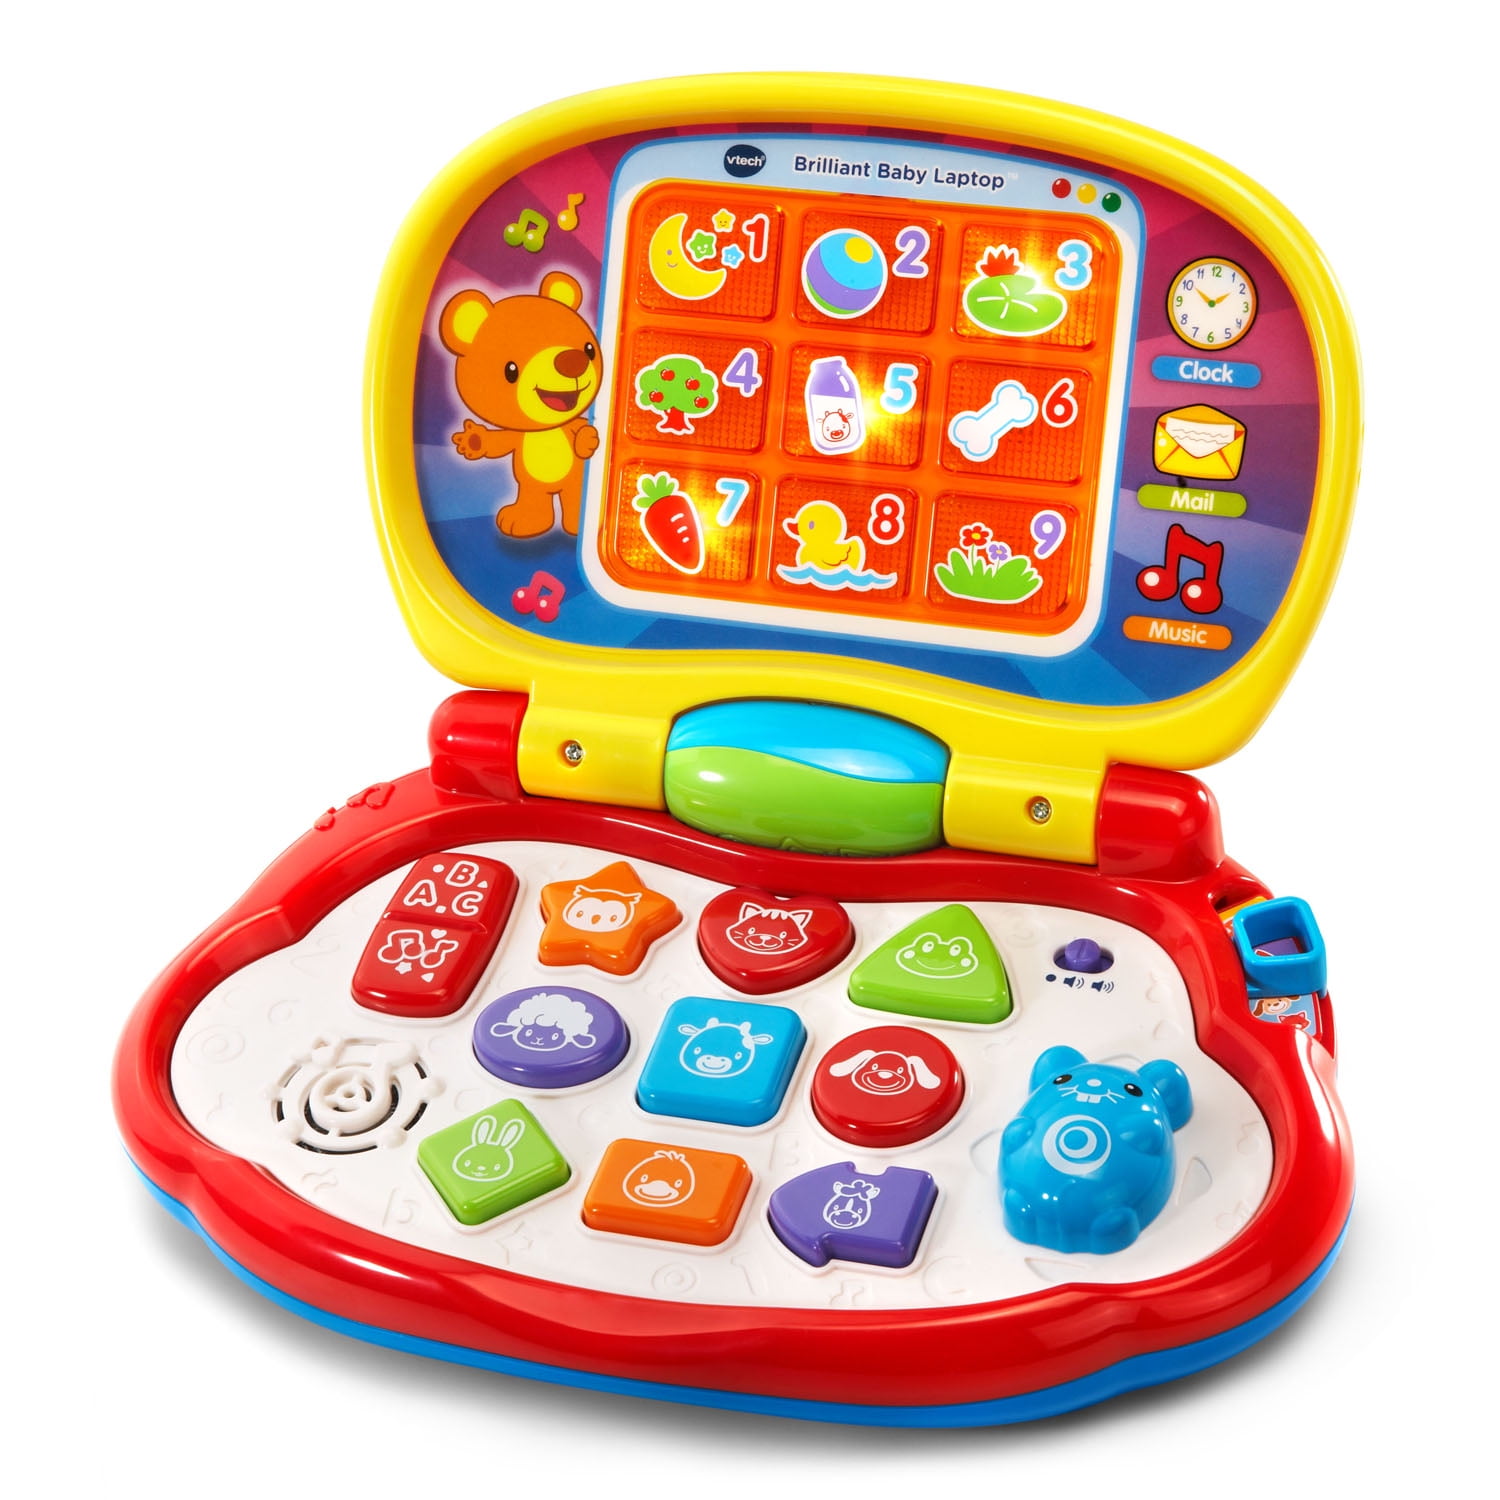 Light Up Screen Shapes & Music VTech Baby's Laptop With Animals 6-36 Months 